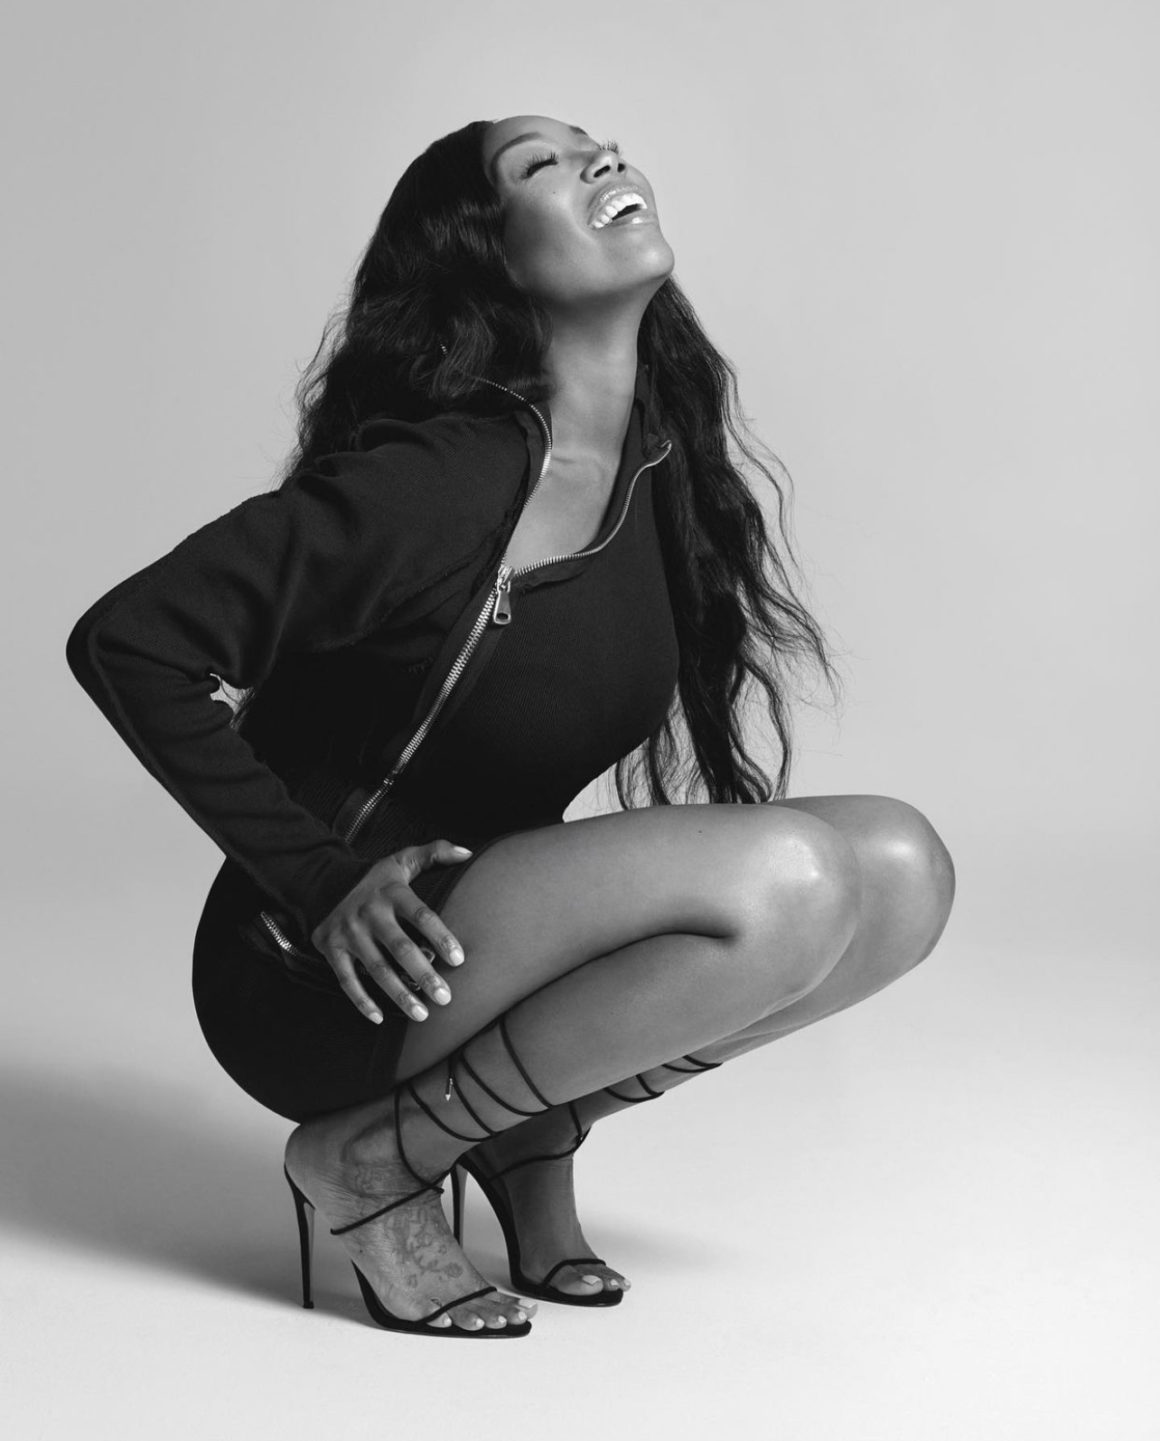 Brandy Stuns in Black and White Photoshoot Wearing Lionne Clothing Black Long Sleeve Zip Up Mini Dress and Femme LA Black Lace Up Sandals7